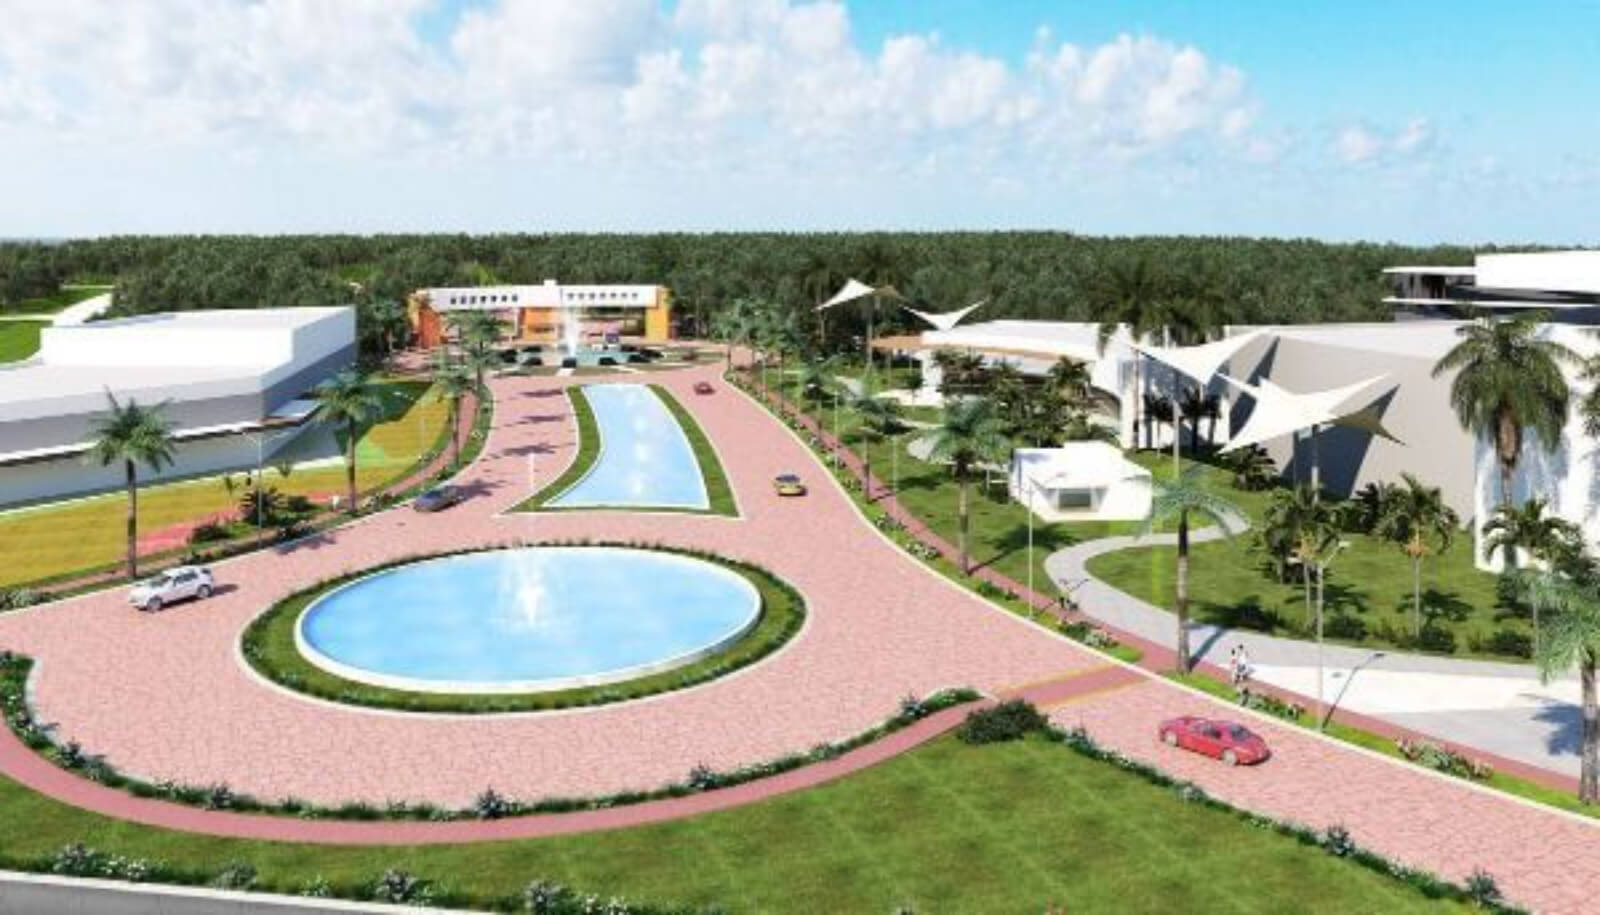 Apartment with garden and pool, Gym, pre-construction, for sale, Cancún